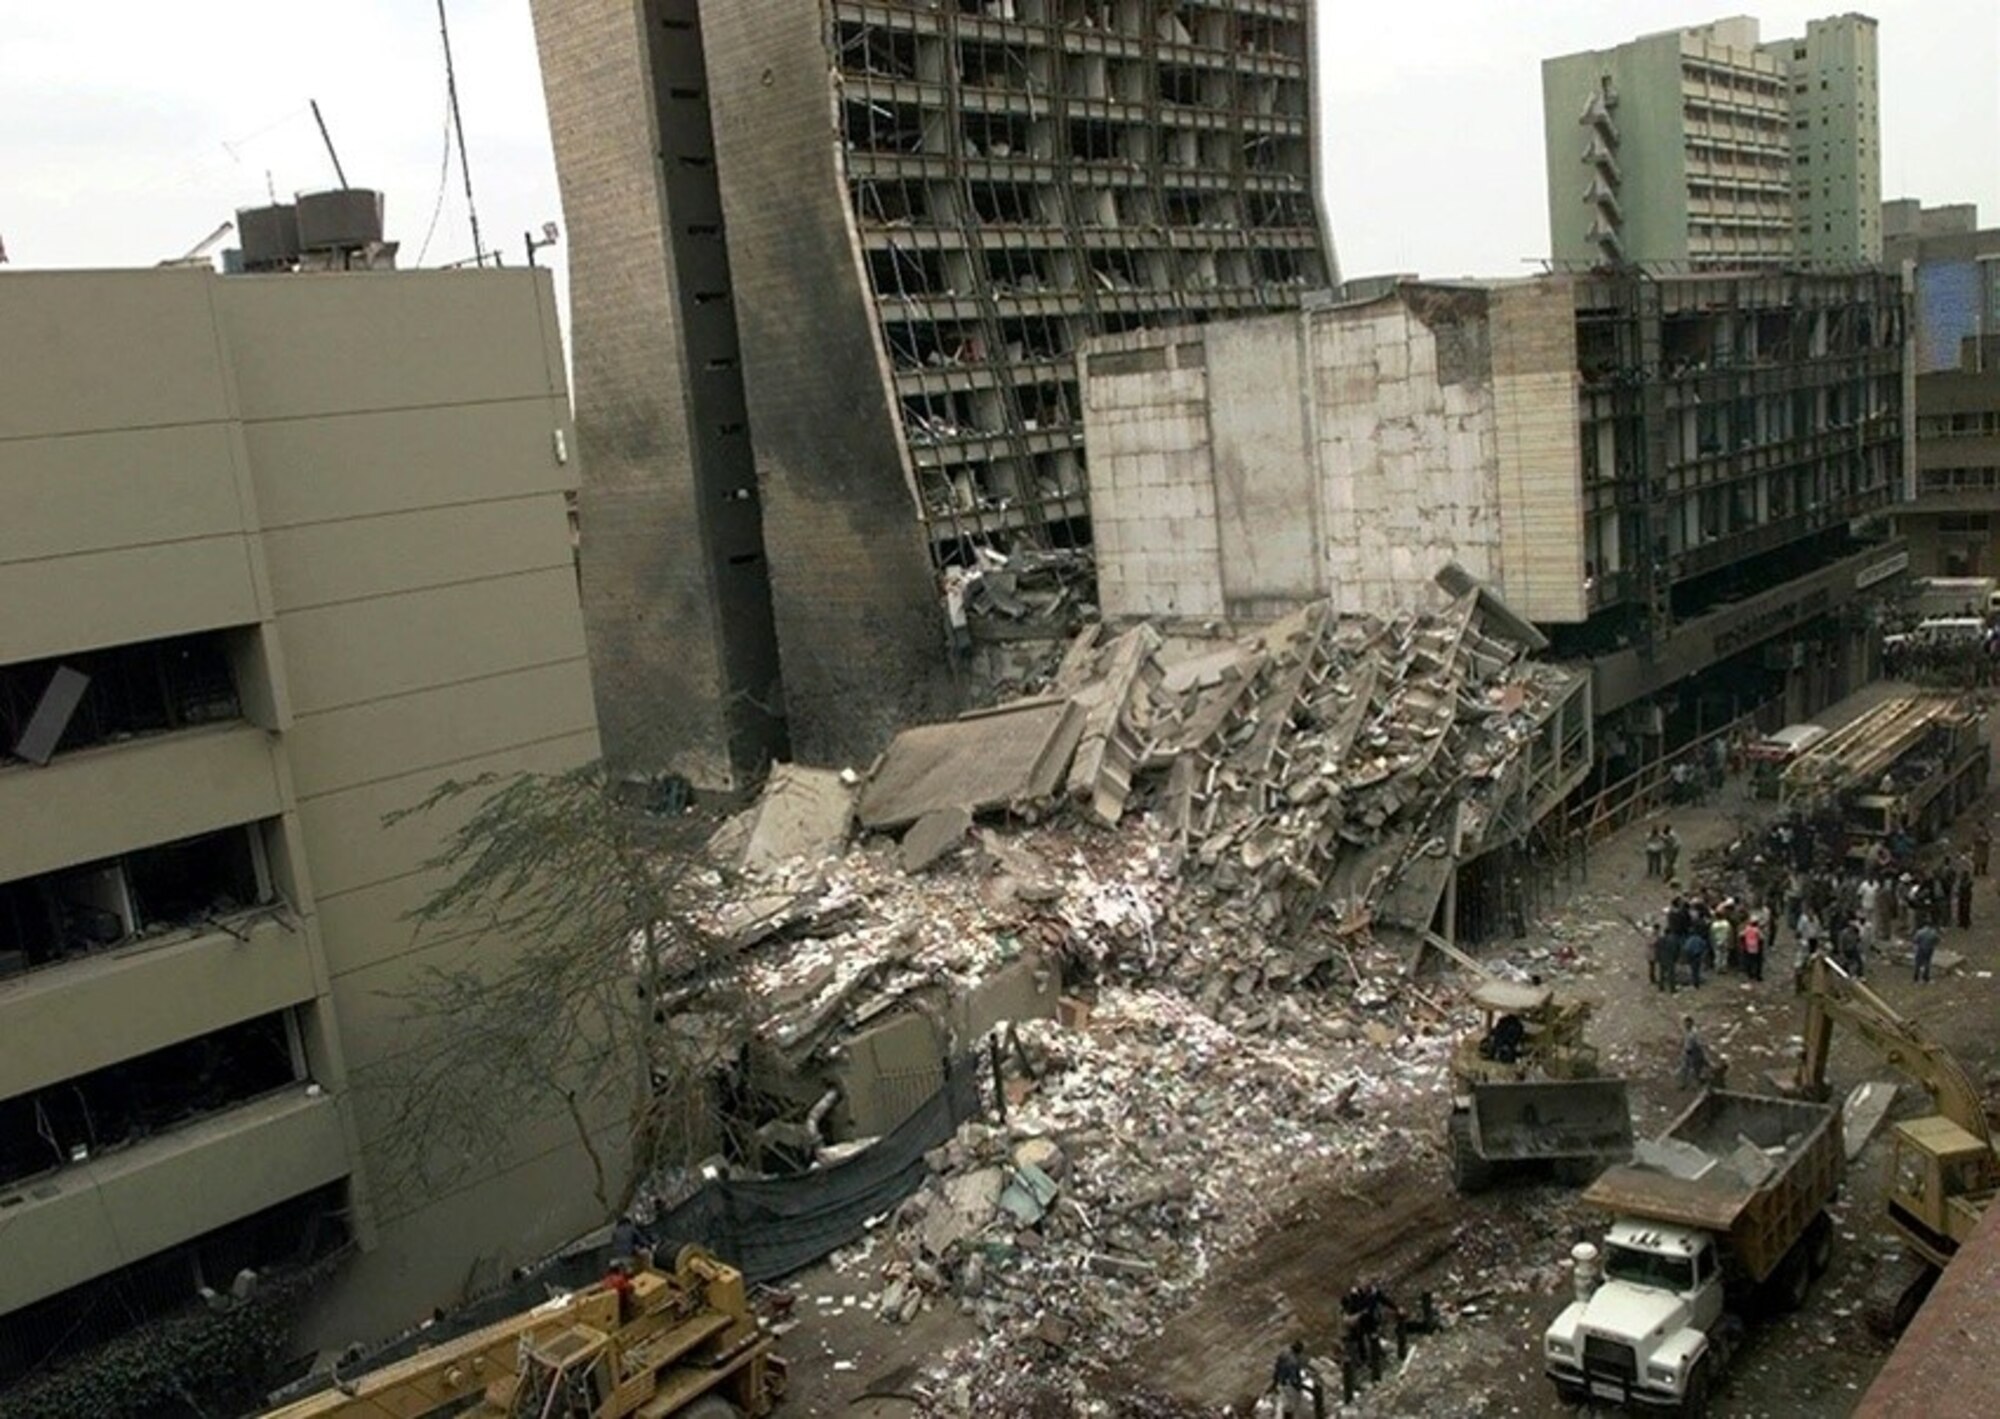 The U.S. Embassy, left, is pictured next to bombed ruins in Nairobi, Kenya, Aug. 8, 1998, one day after terrorist bombs exploded at the U.S. embassies in Kenya and Dar es Salaam, Tanzania (AP/Wide World photo)